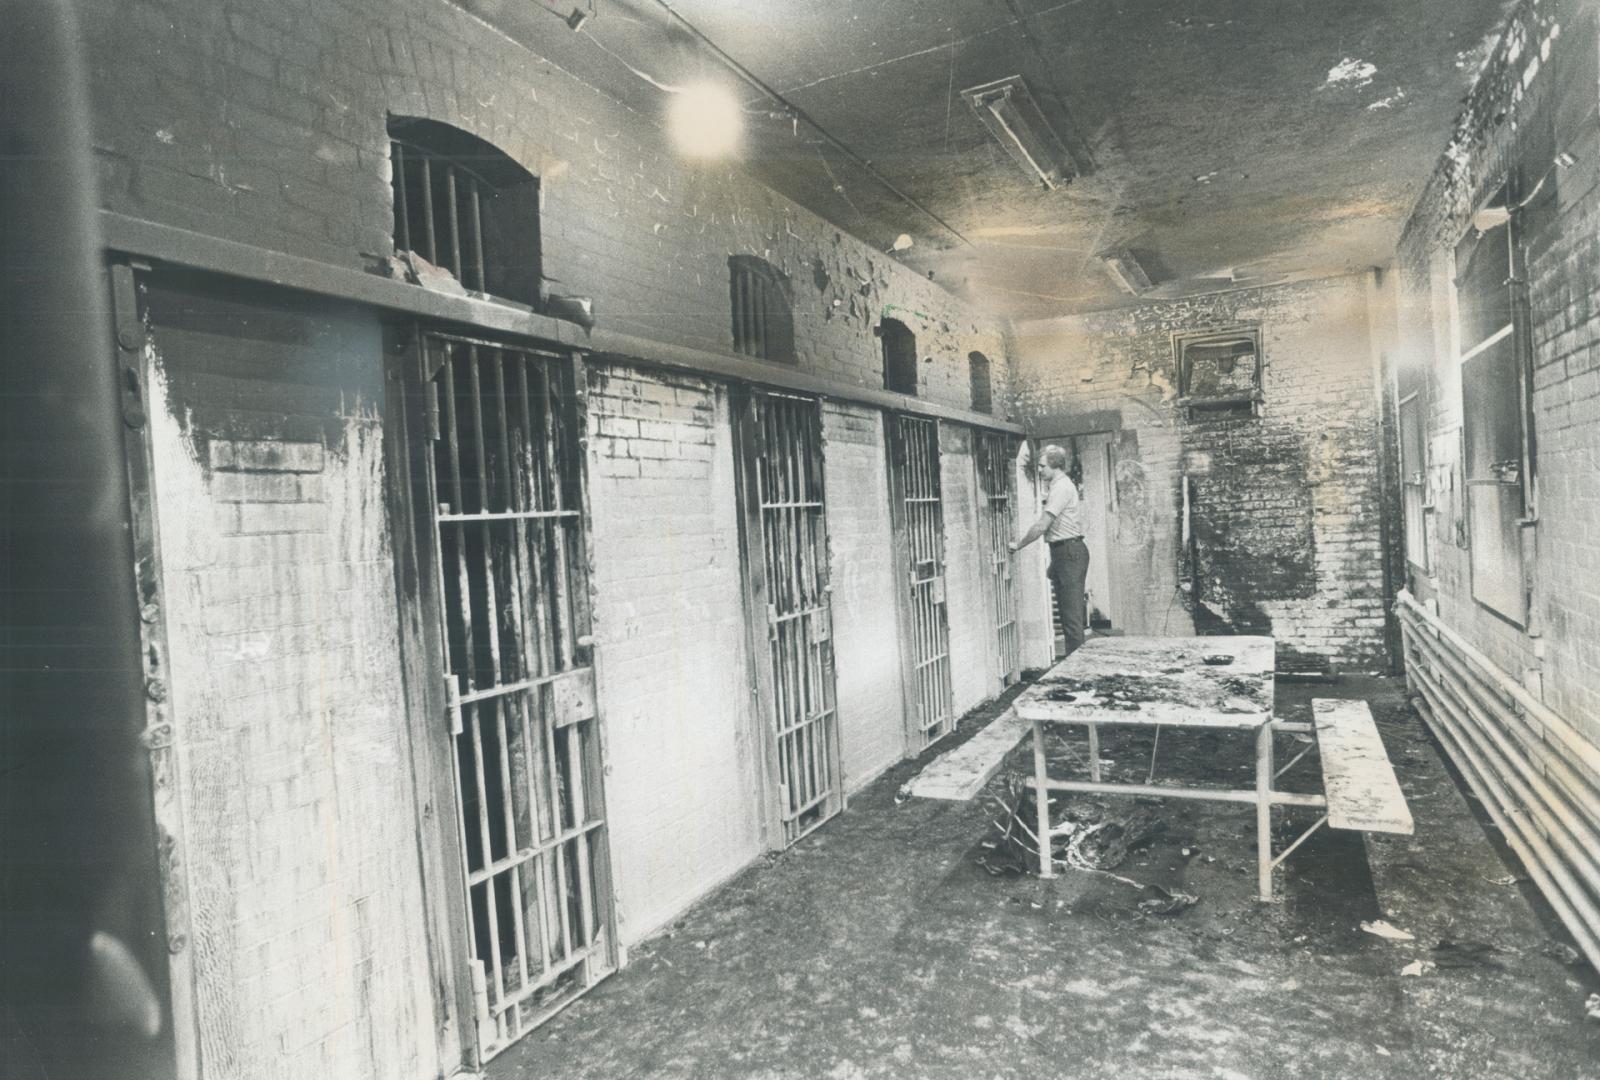 Inmates call this death row in the jail at Stratford